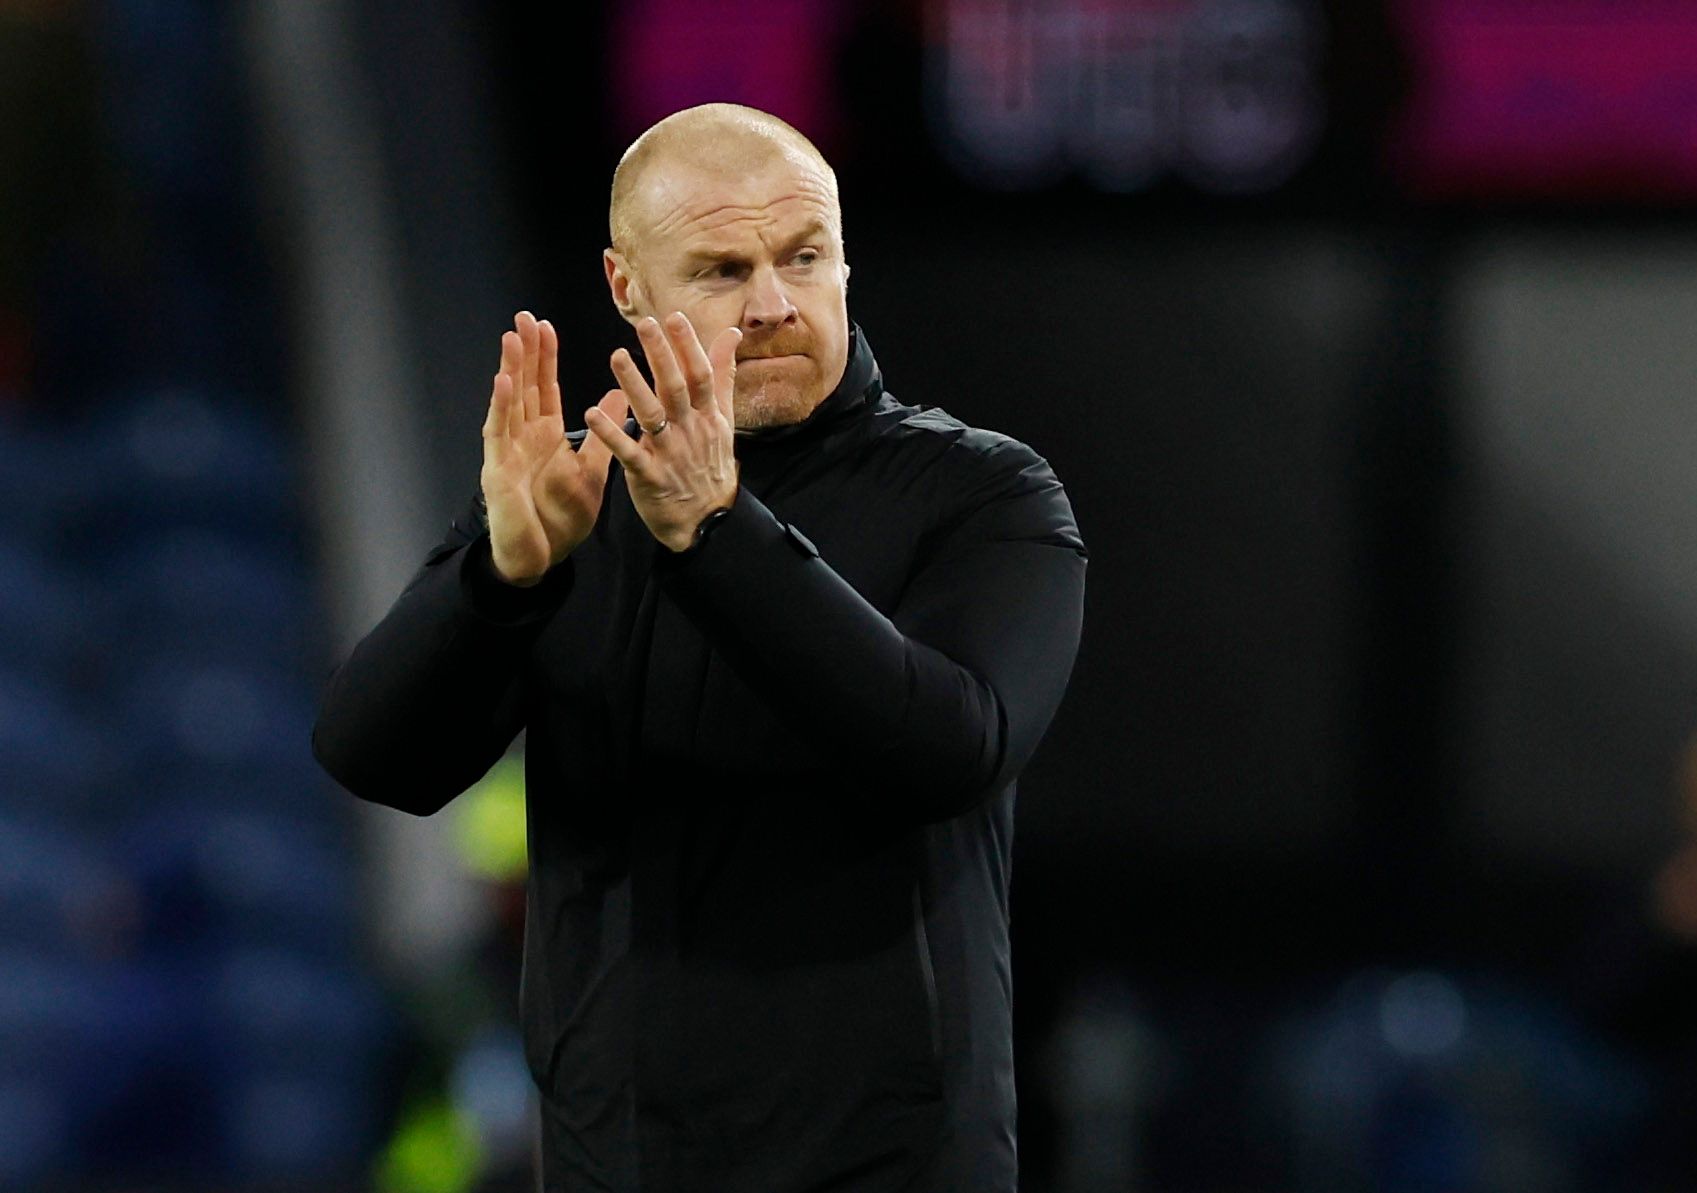 Everton: Sean Dyche ‘very interested’ in taking over as manager -Everton News